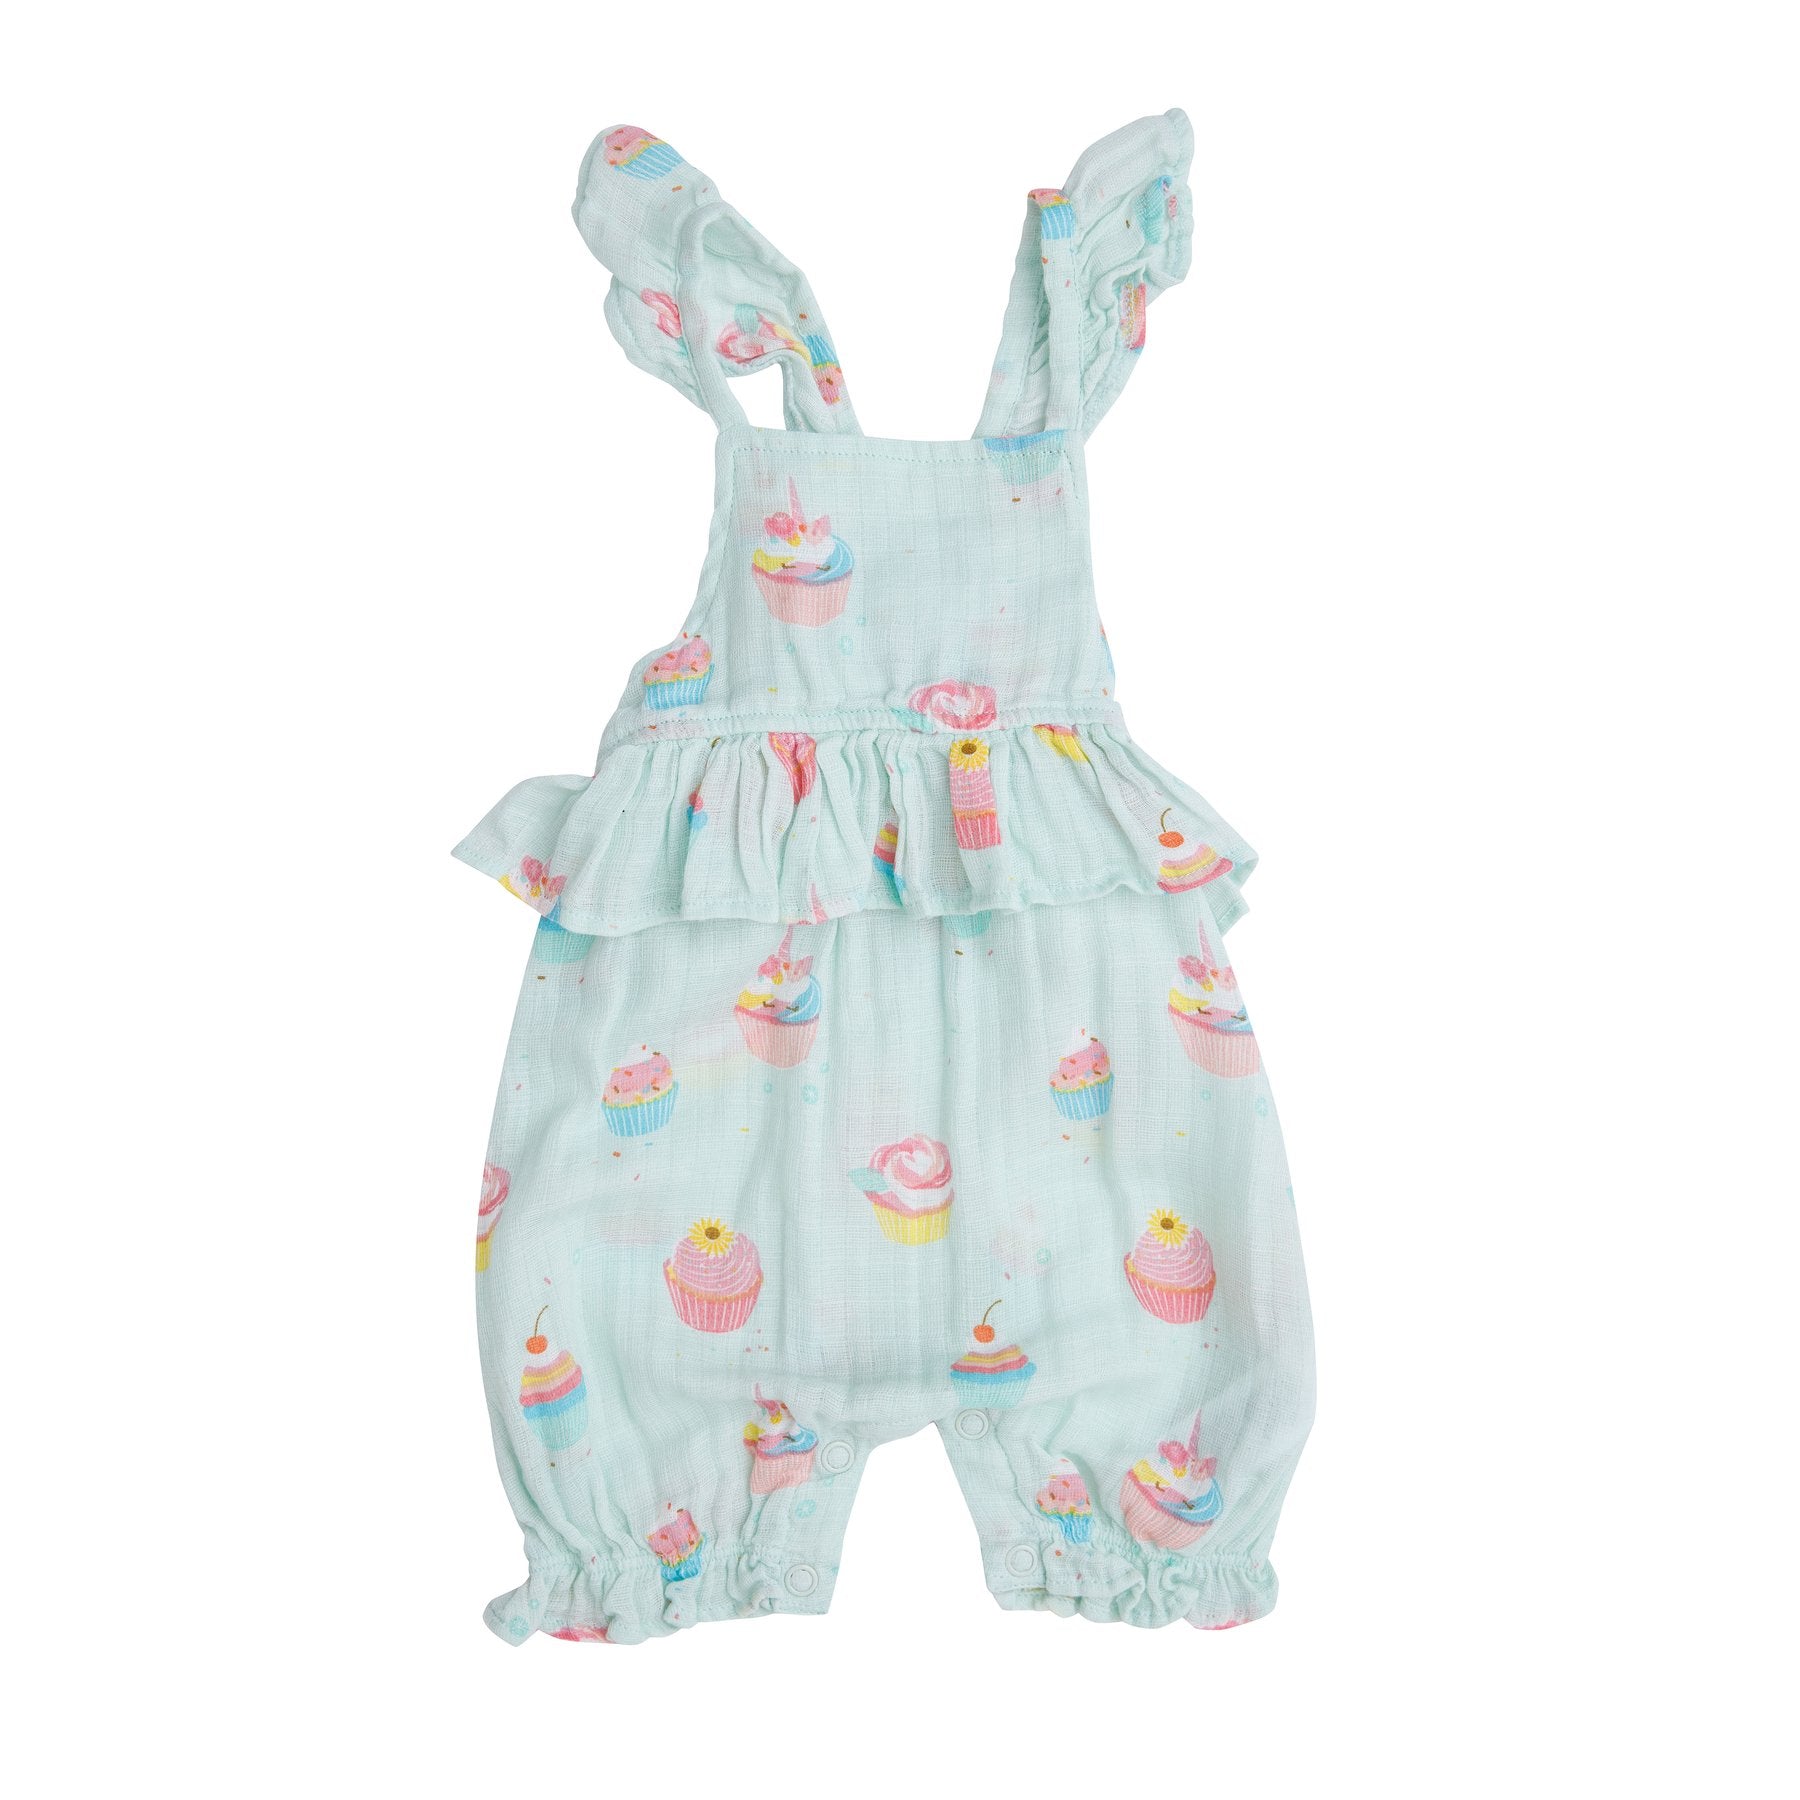 Ruffle Shortie in Cupcake  - Doodlebug's Children's Boutique